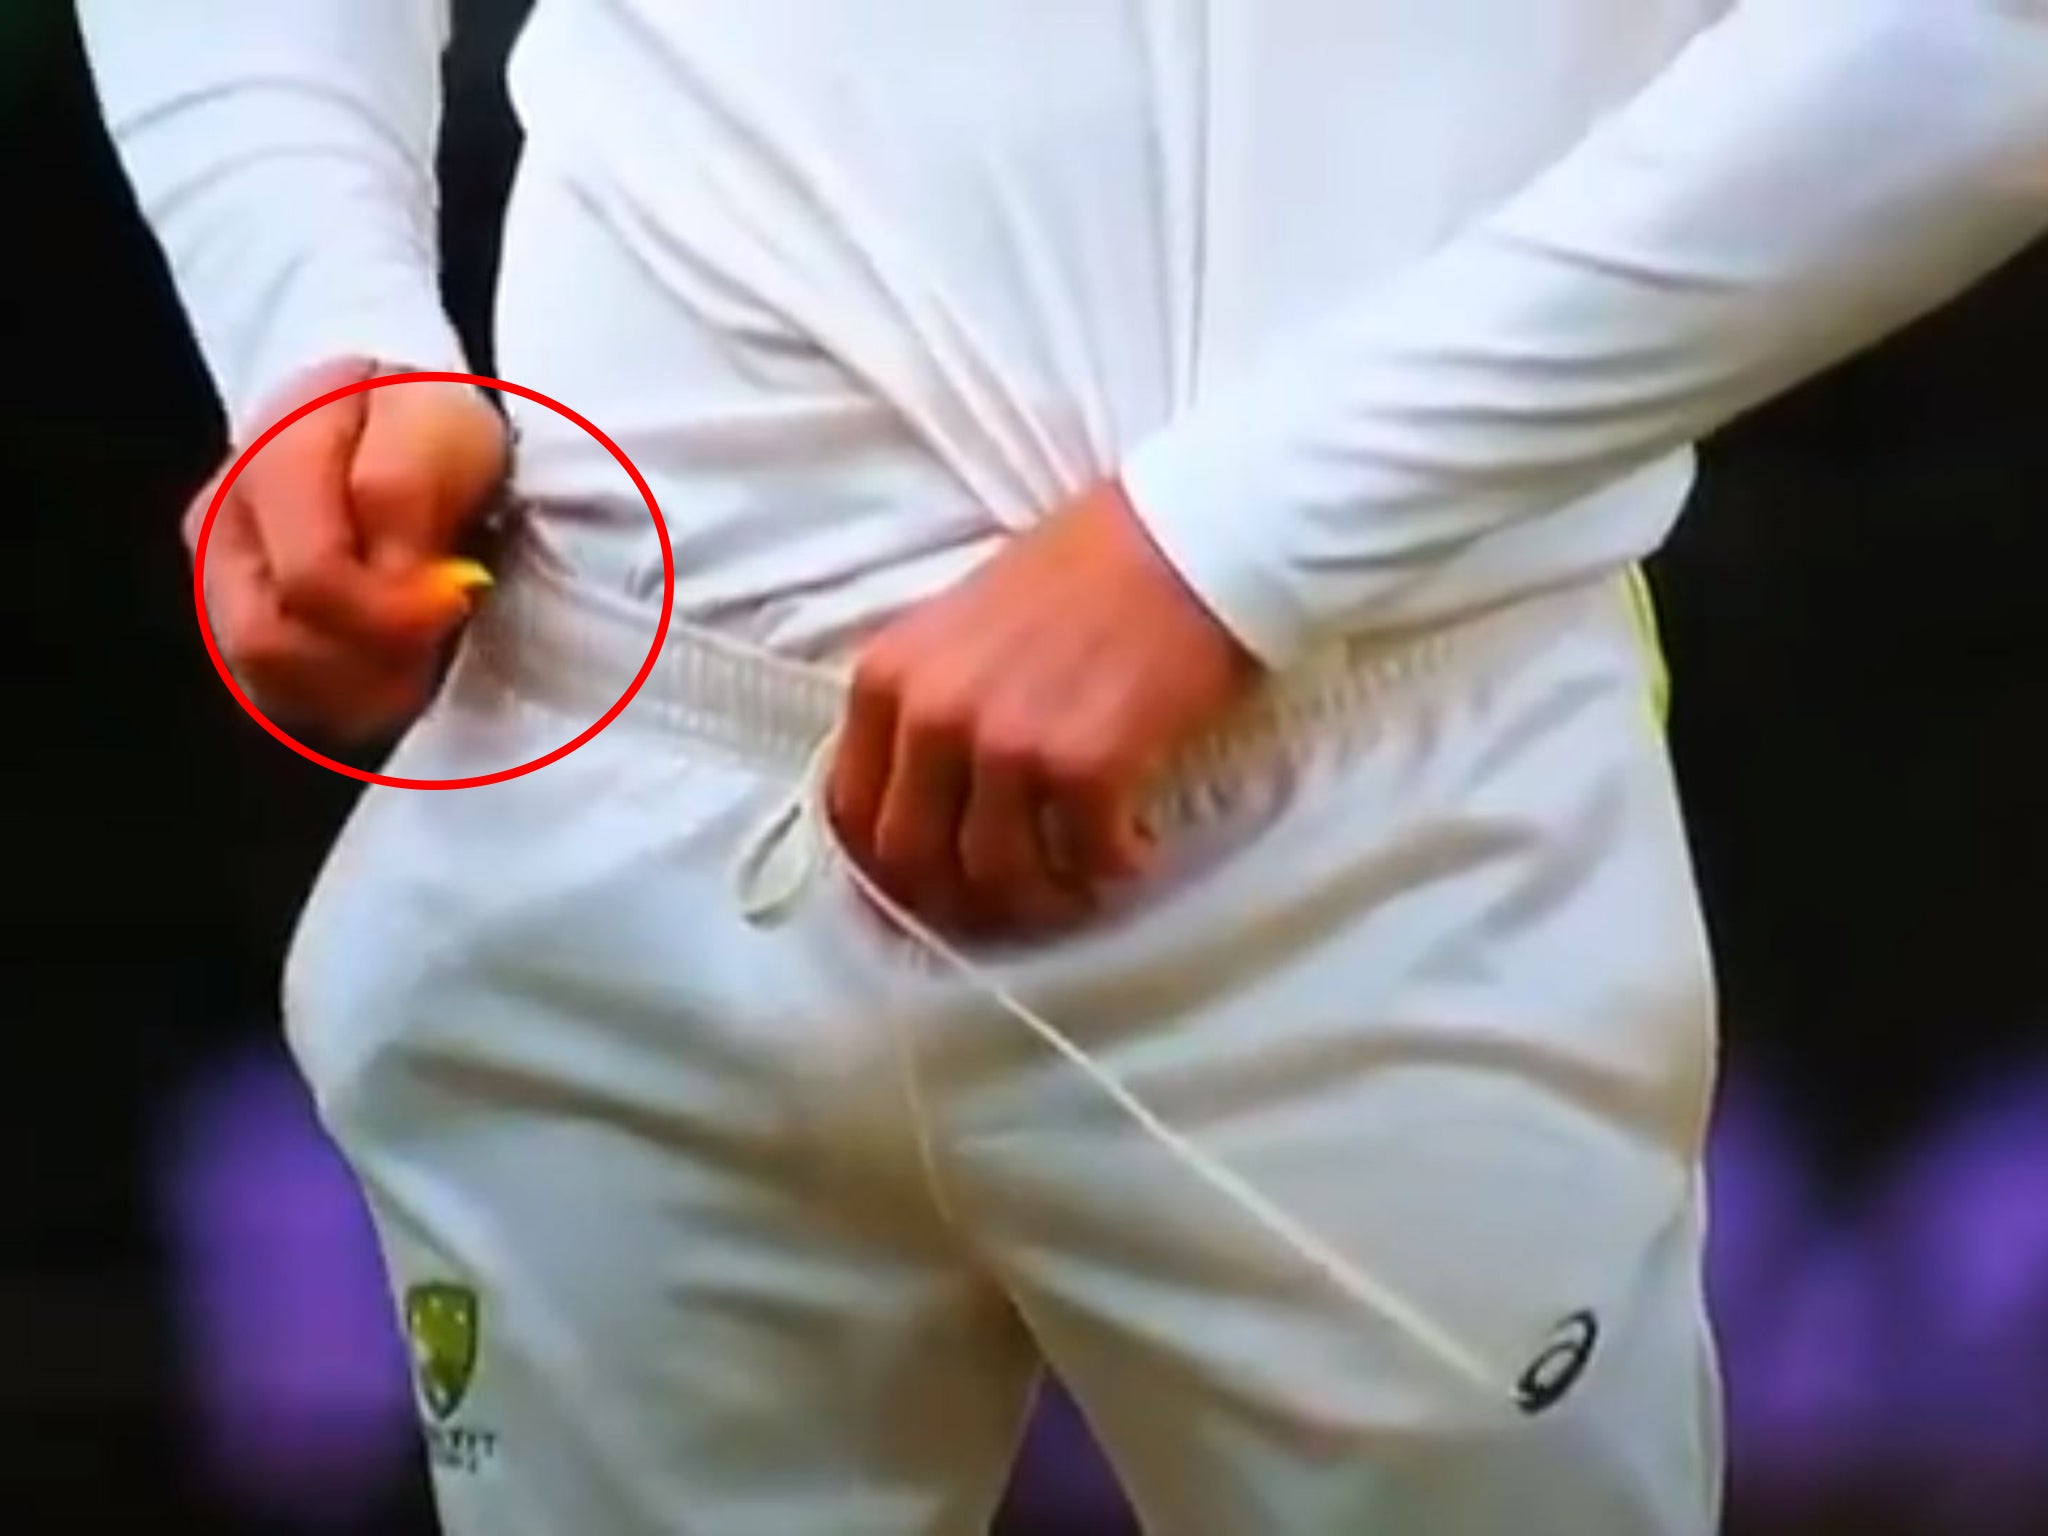 Bancroft has sticky tape in his trouser pocket while working on the ball